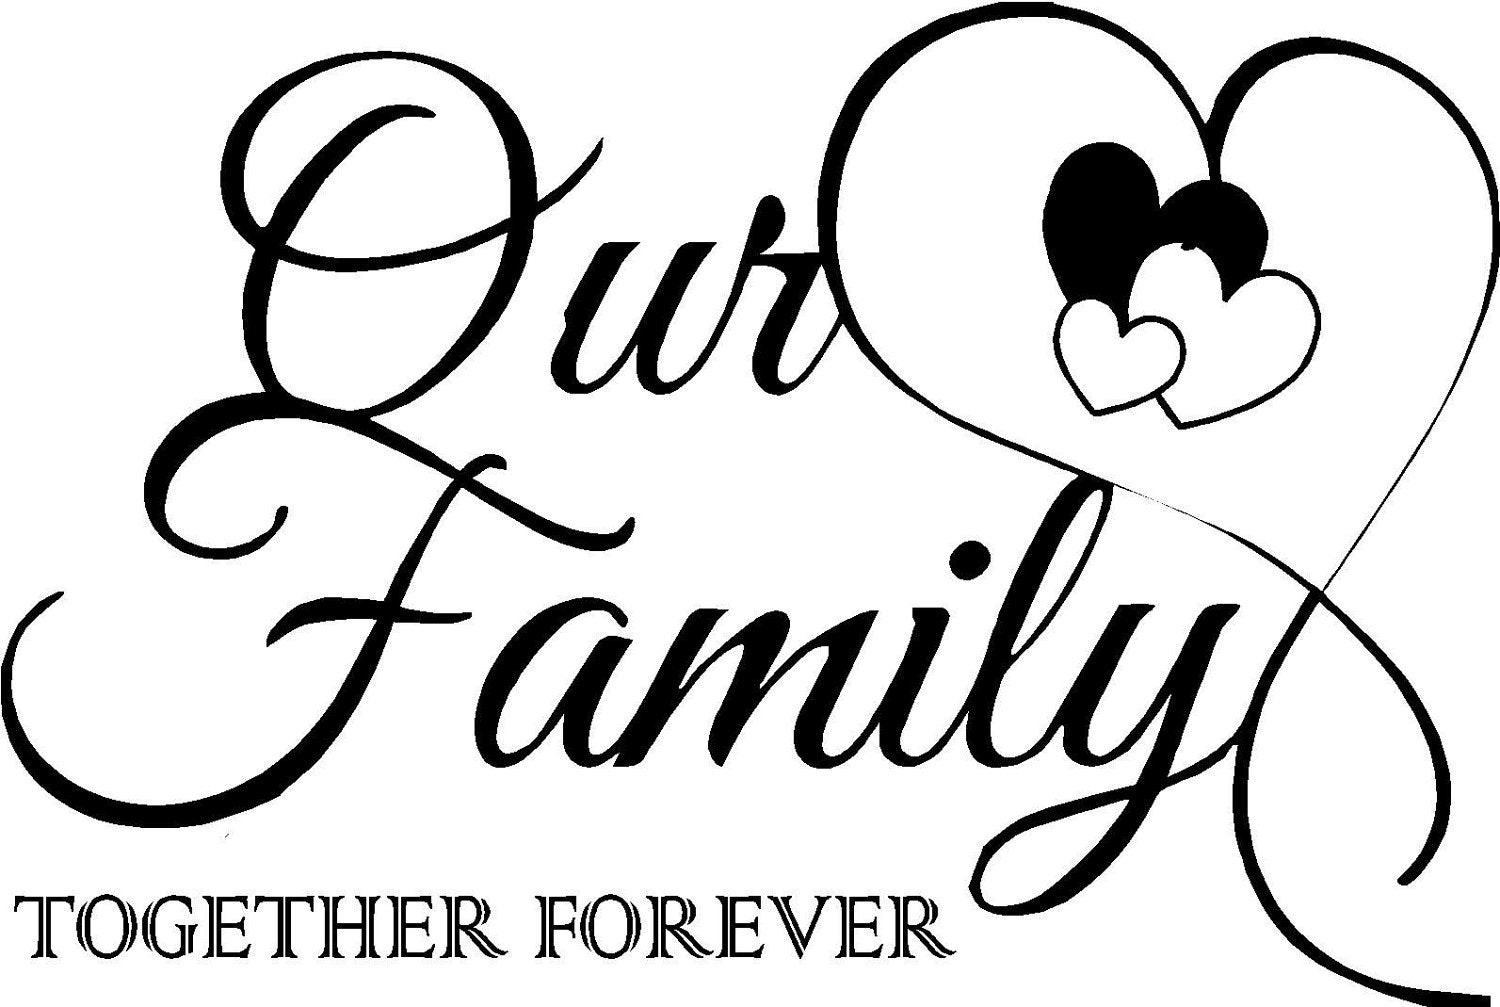 Family Is Forever Quote
 Quote Our family to her forever with by vinylforall on Etsy